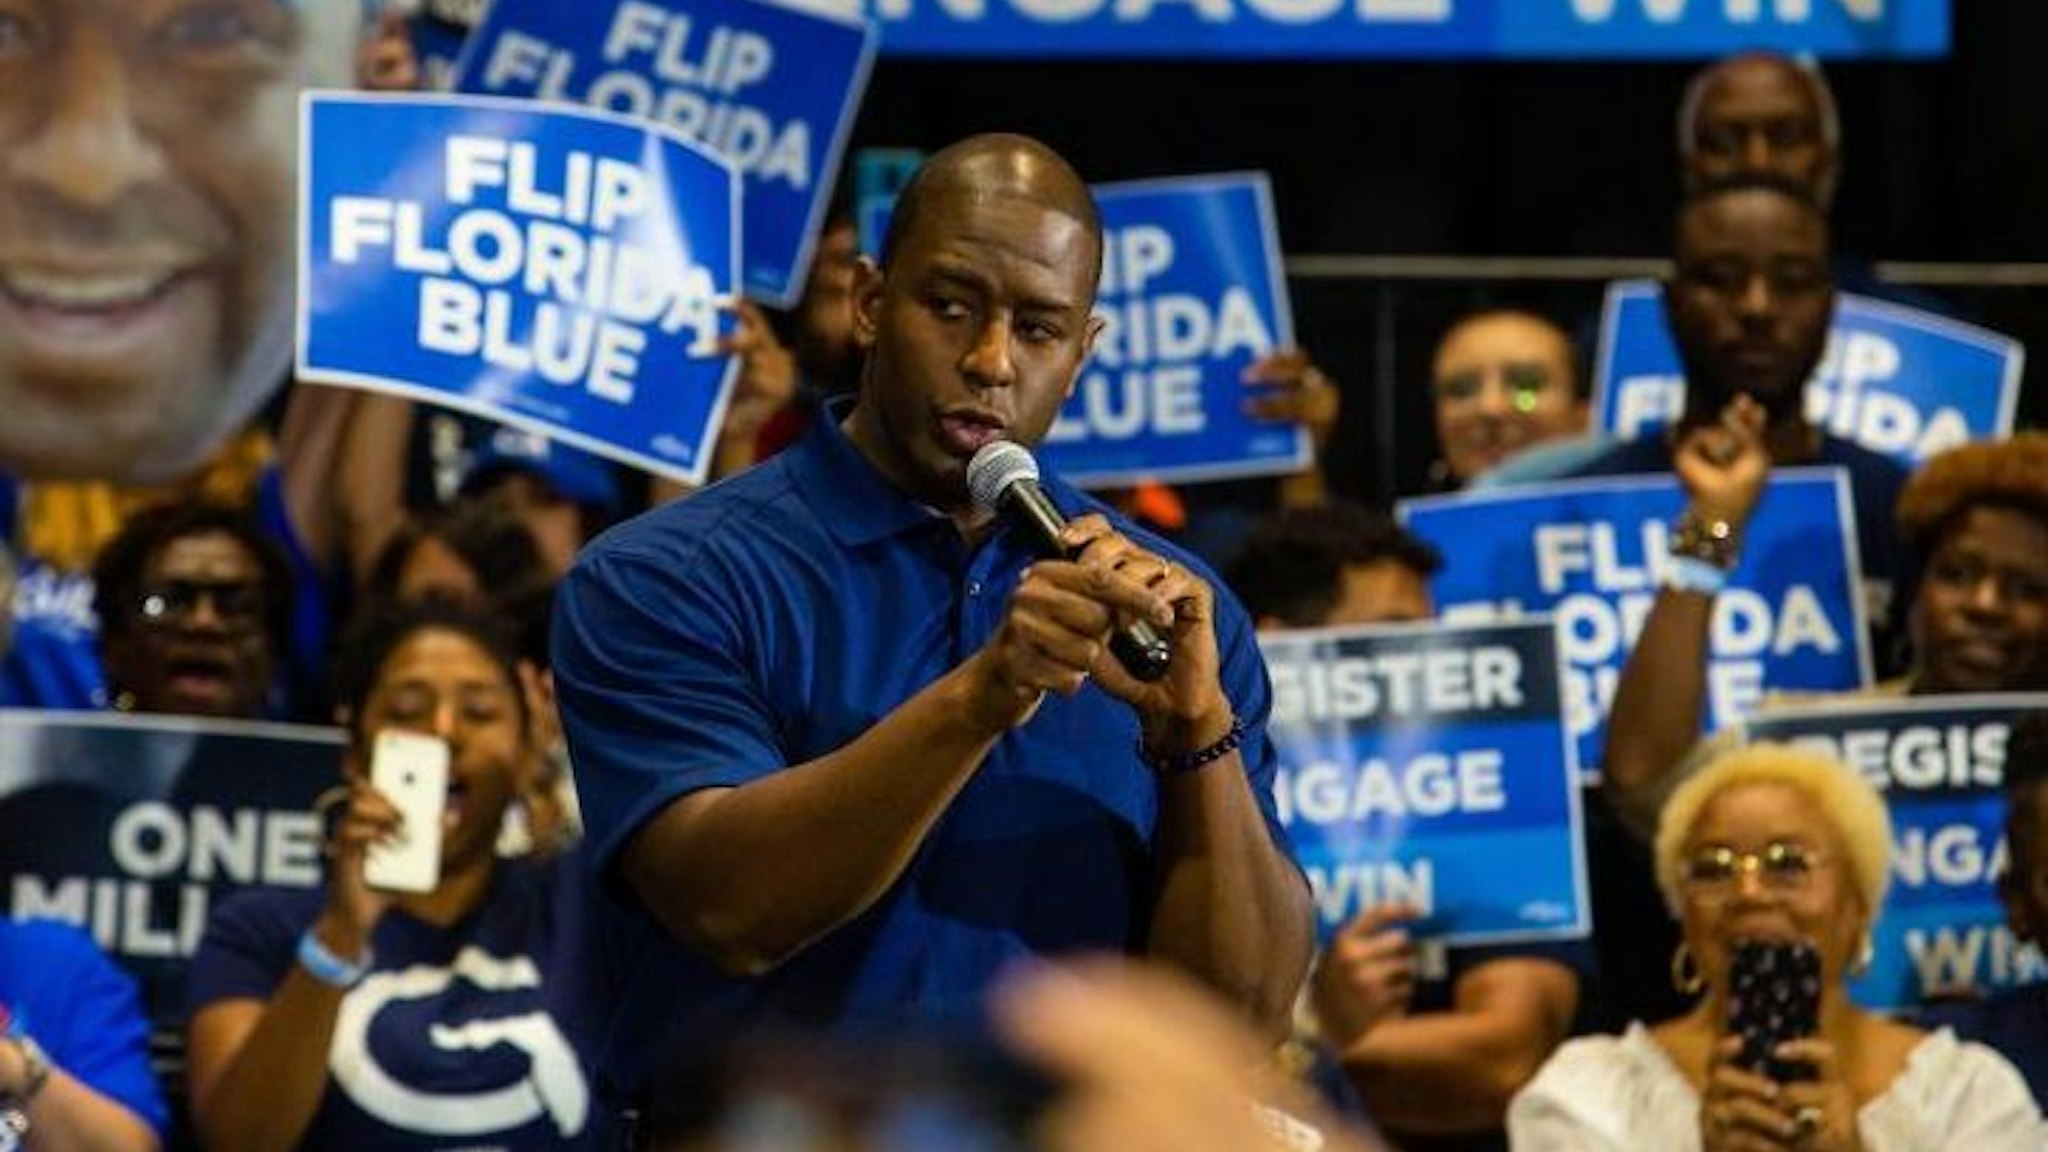 The former Florida governor candidate Andrew Gillum address the audience at a public event on March 20, 2019 in Miami Gardens, Florida. Gillum proposes to launch a 1 million Florida voter-registration campaign. (Photo by Saul Martinez/Getty Images)